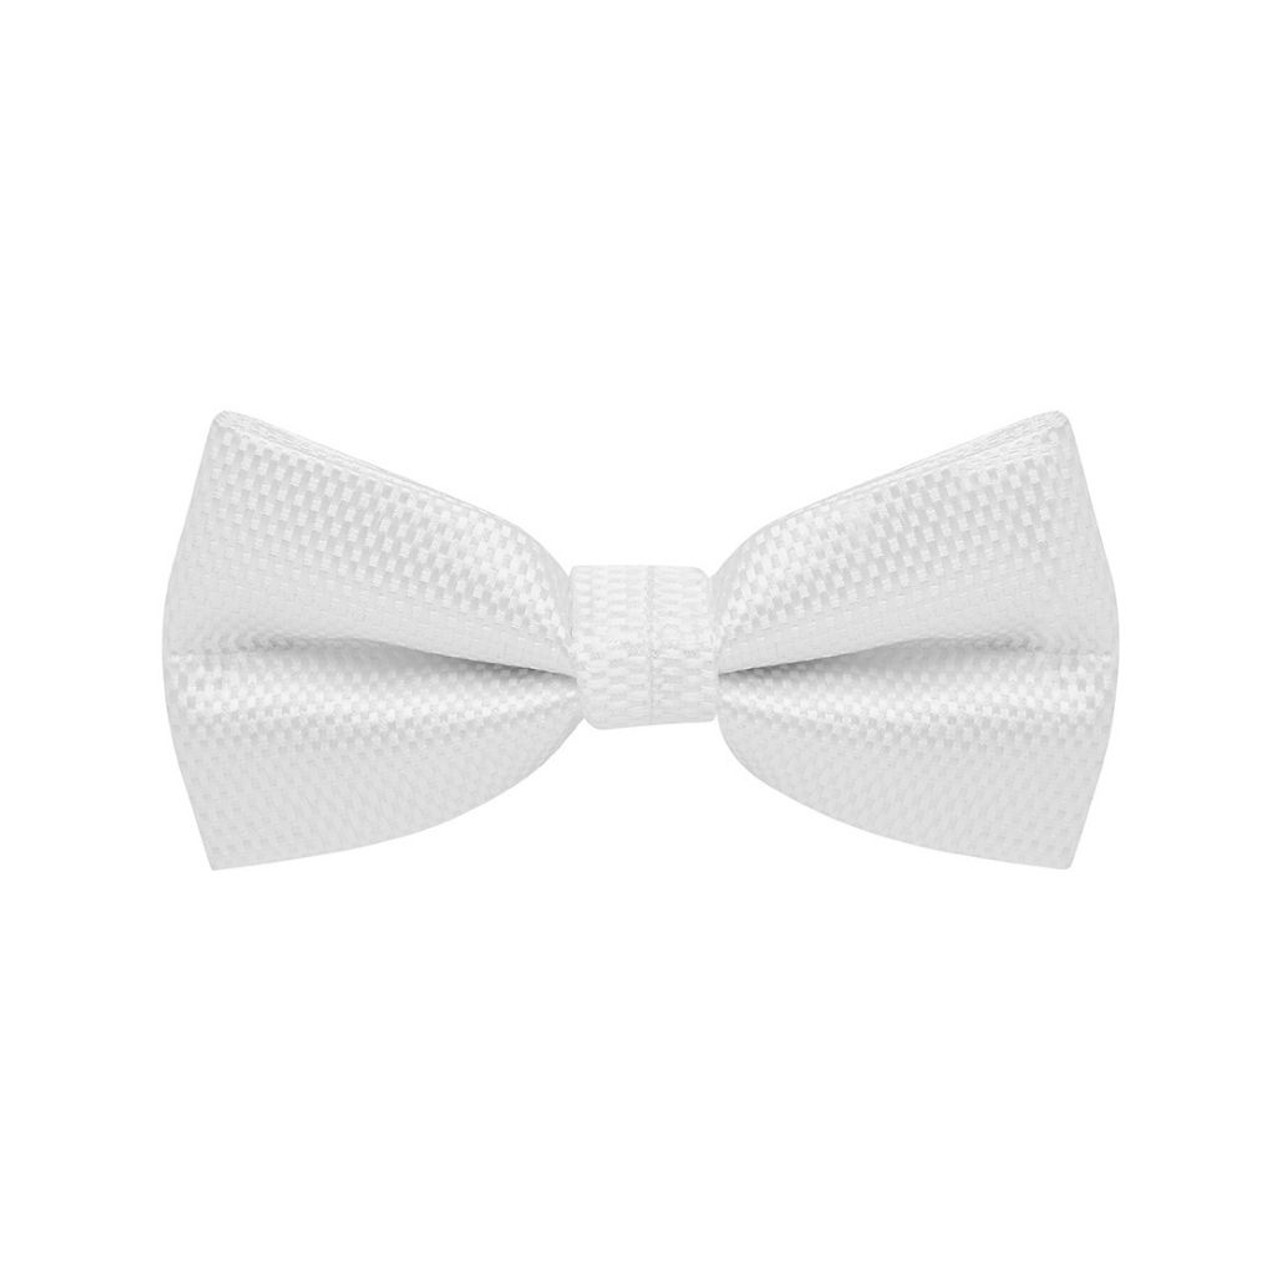 BOW TIE + POCKET SQUARE SET. Carbon. White. Supplied with matching pocket square.